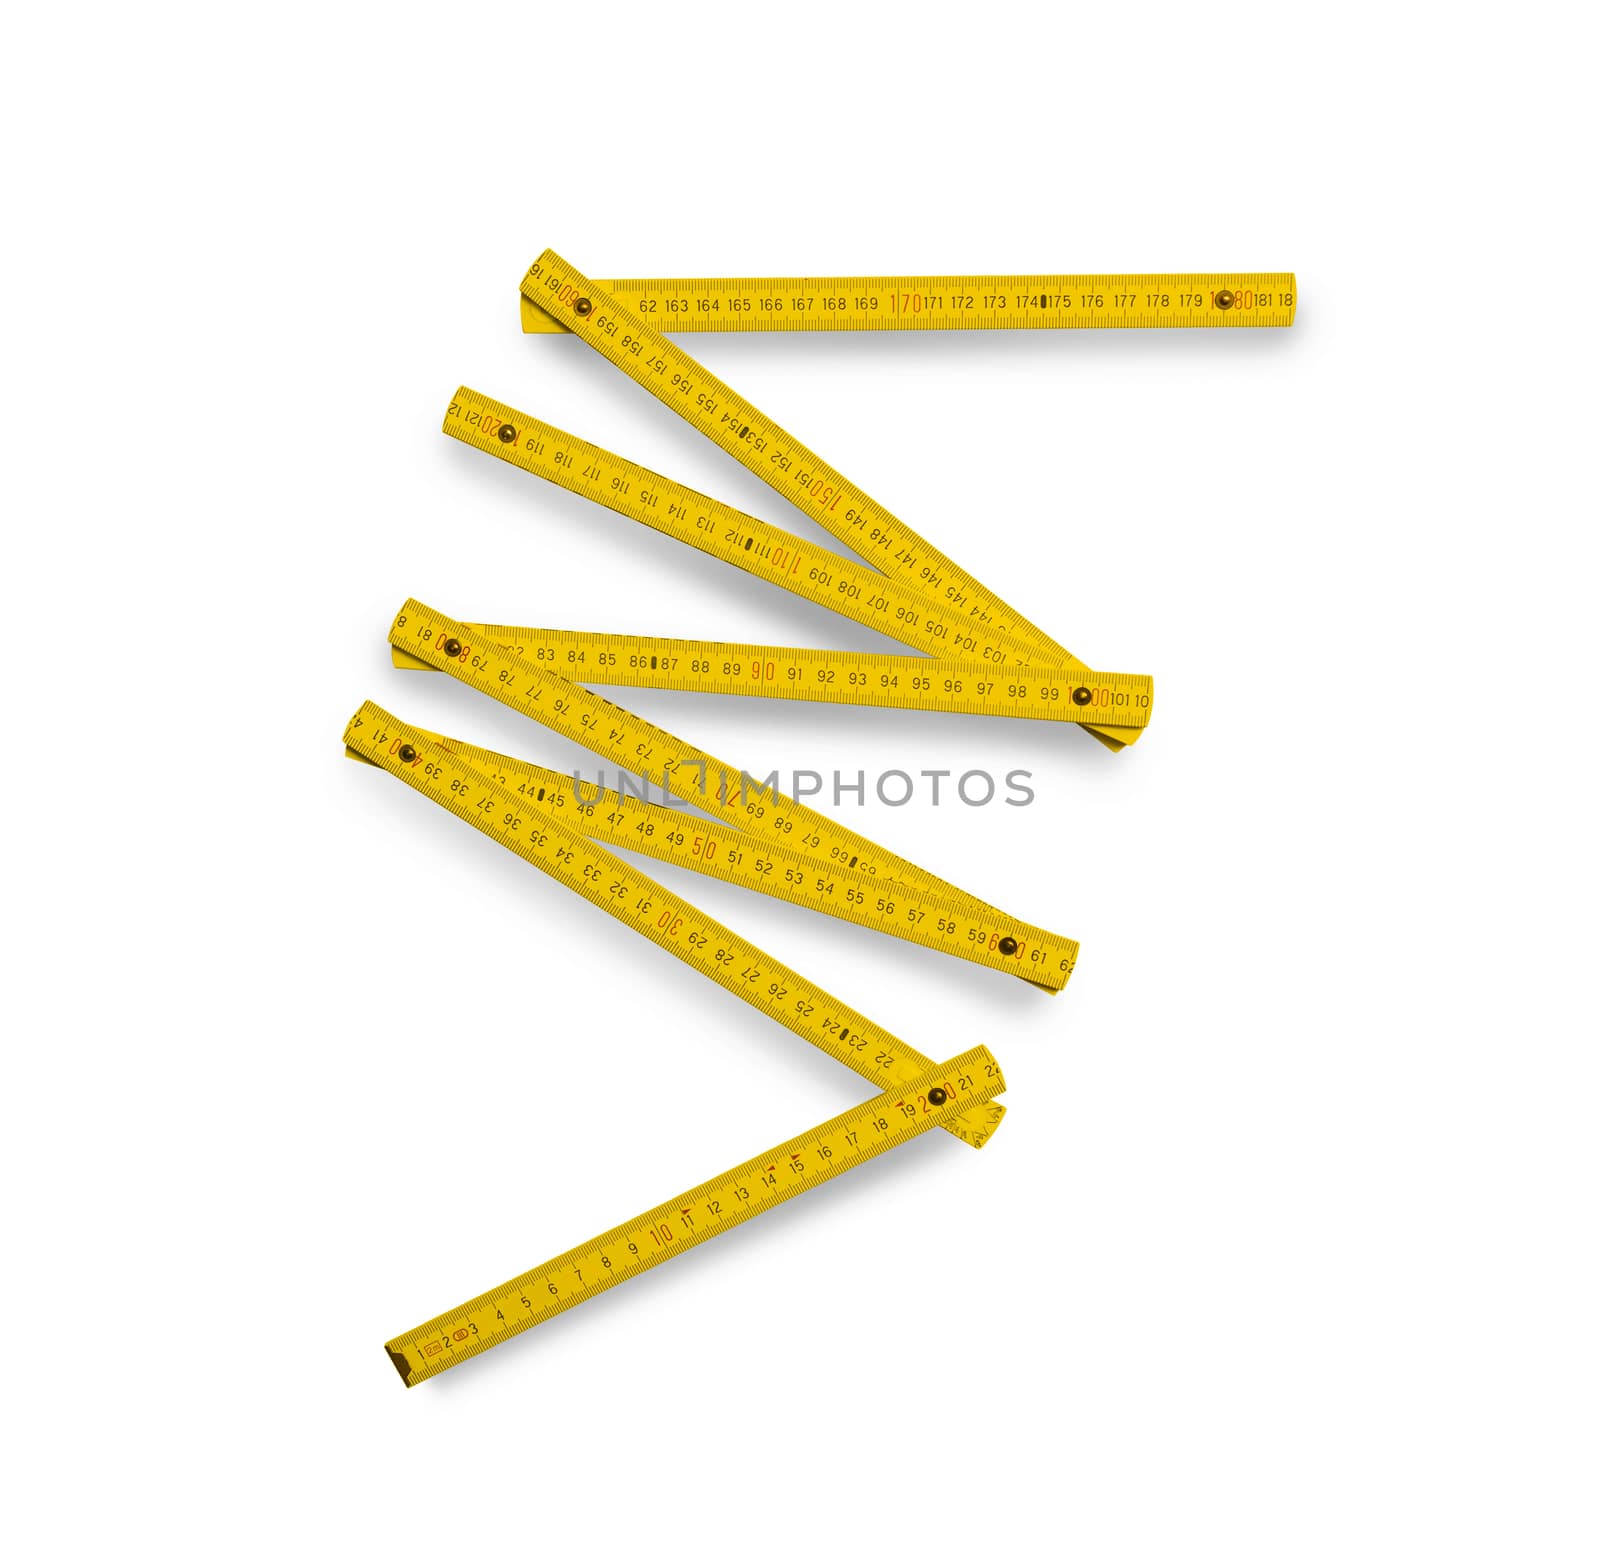 Yellow folding rule measuring tool isolated on white background